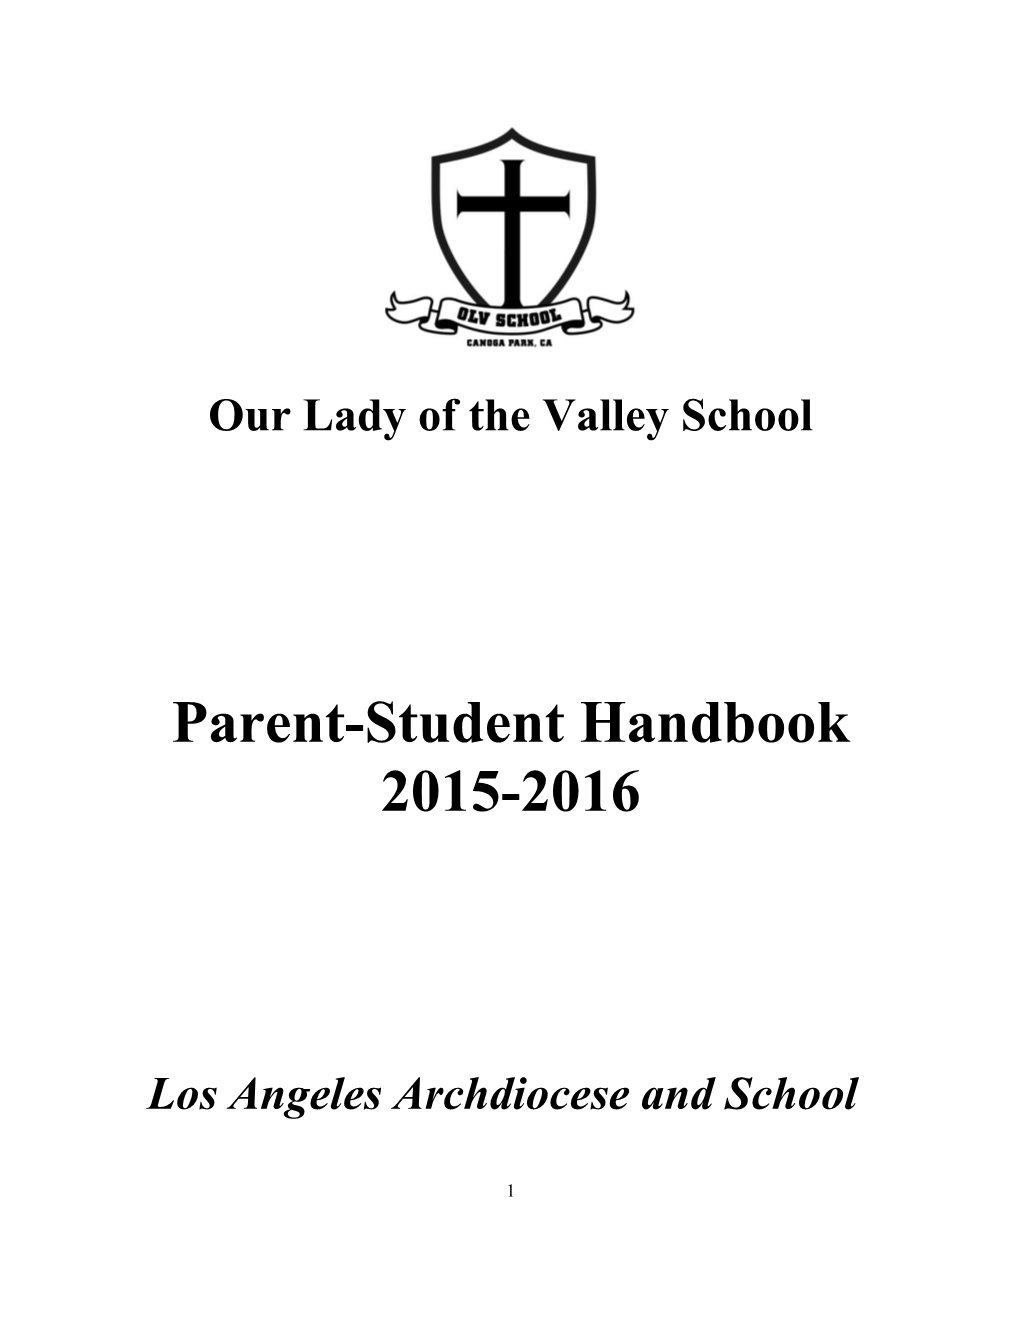 Our Lady of the Valley School